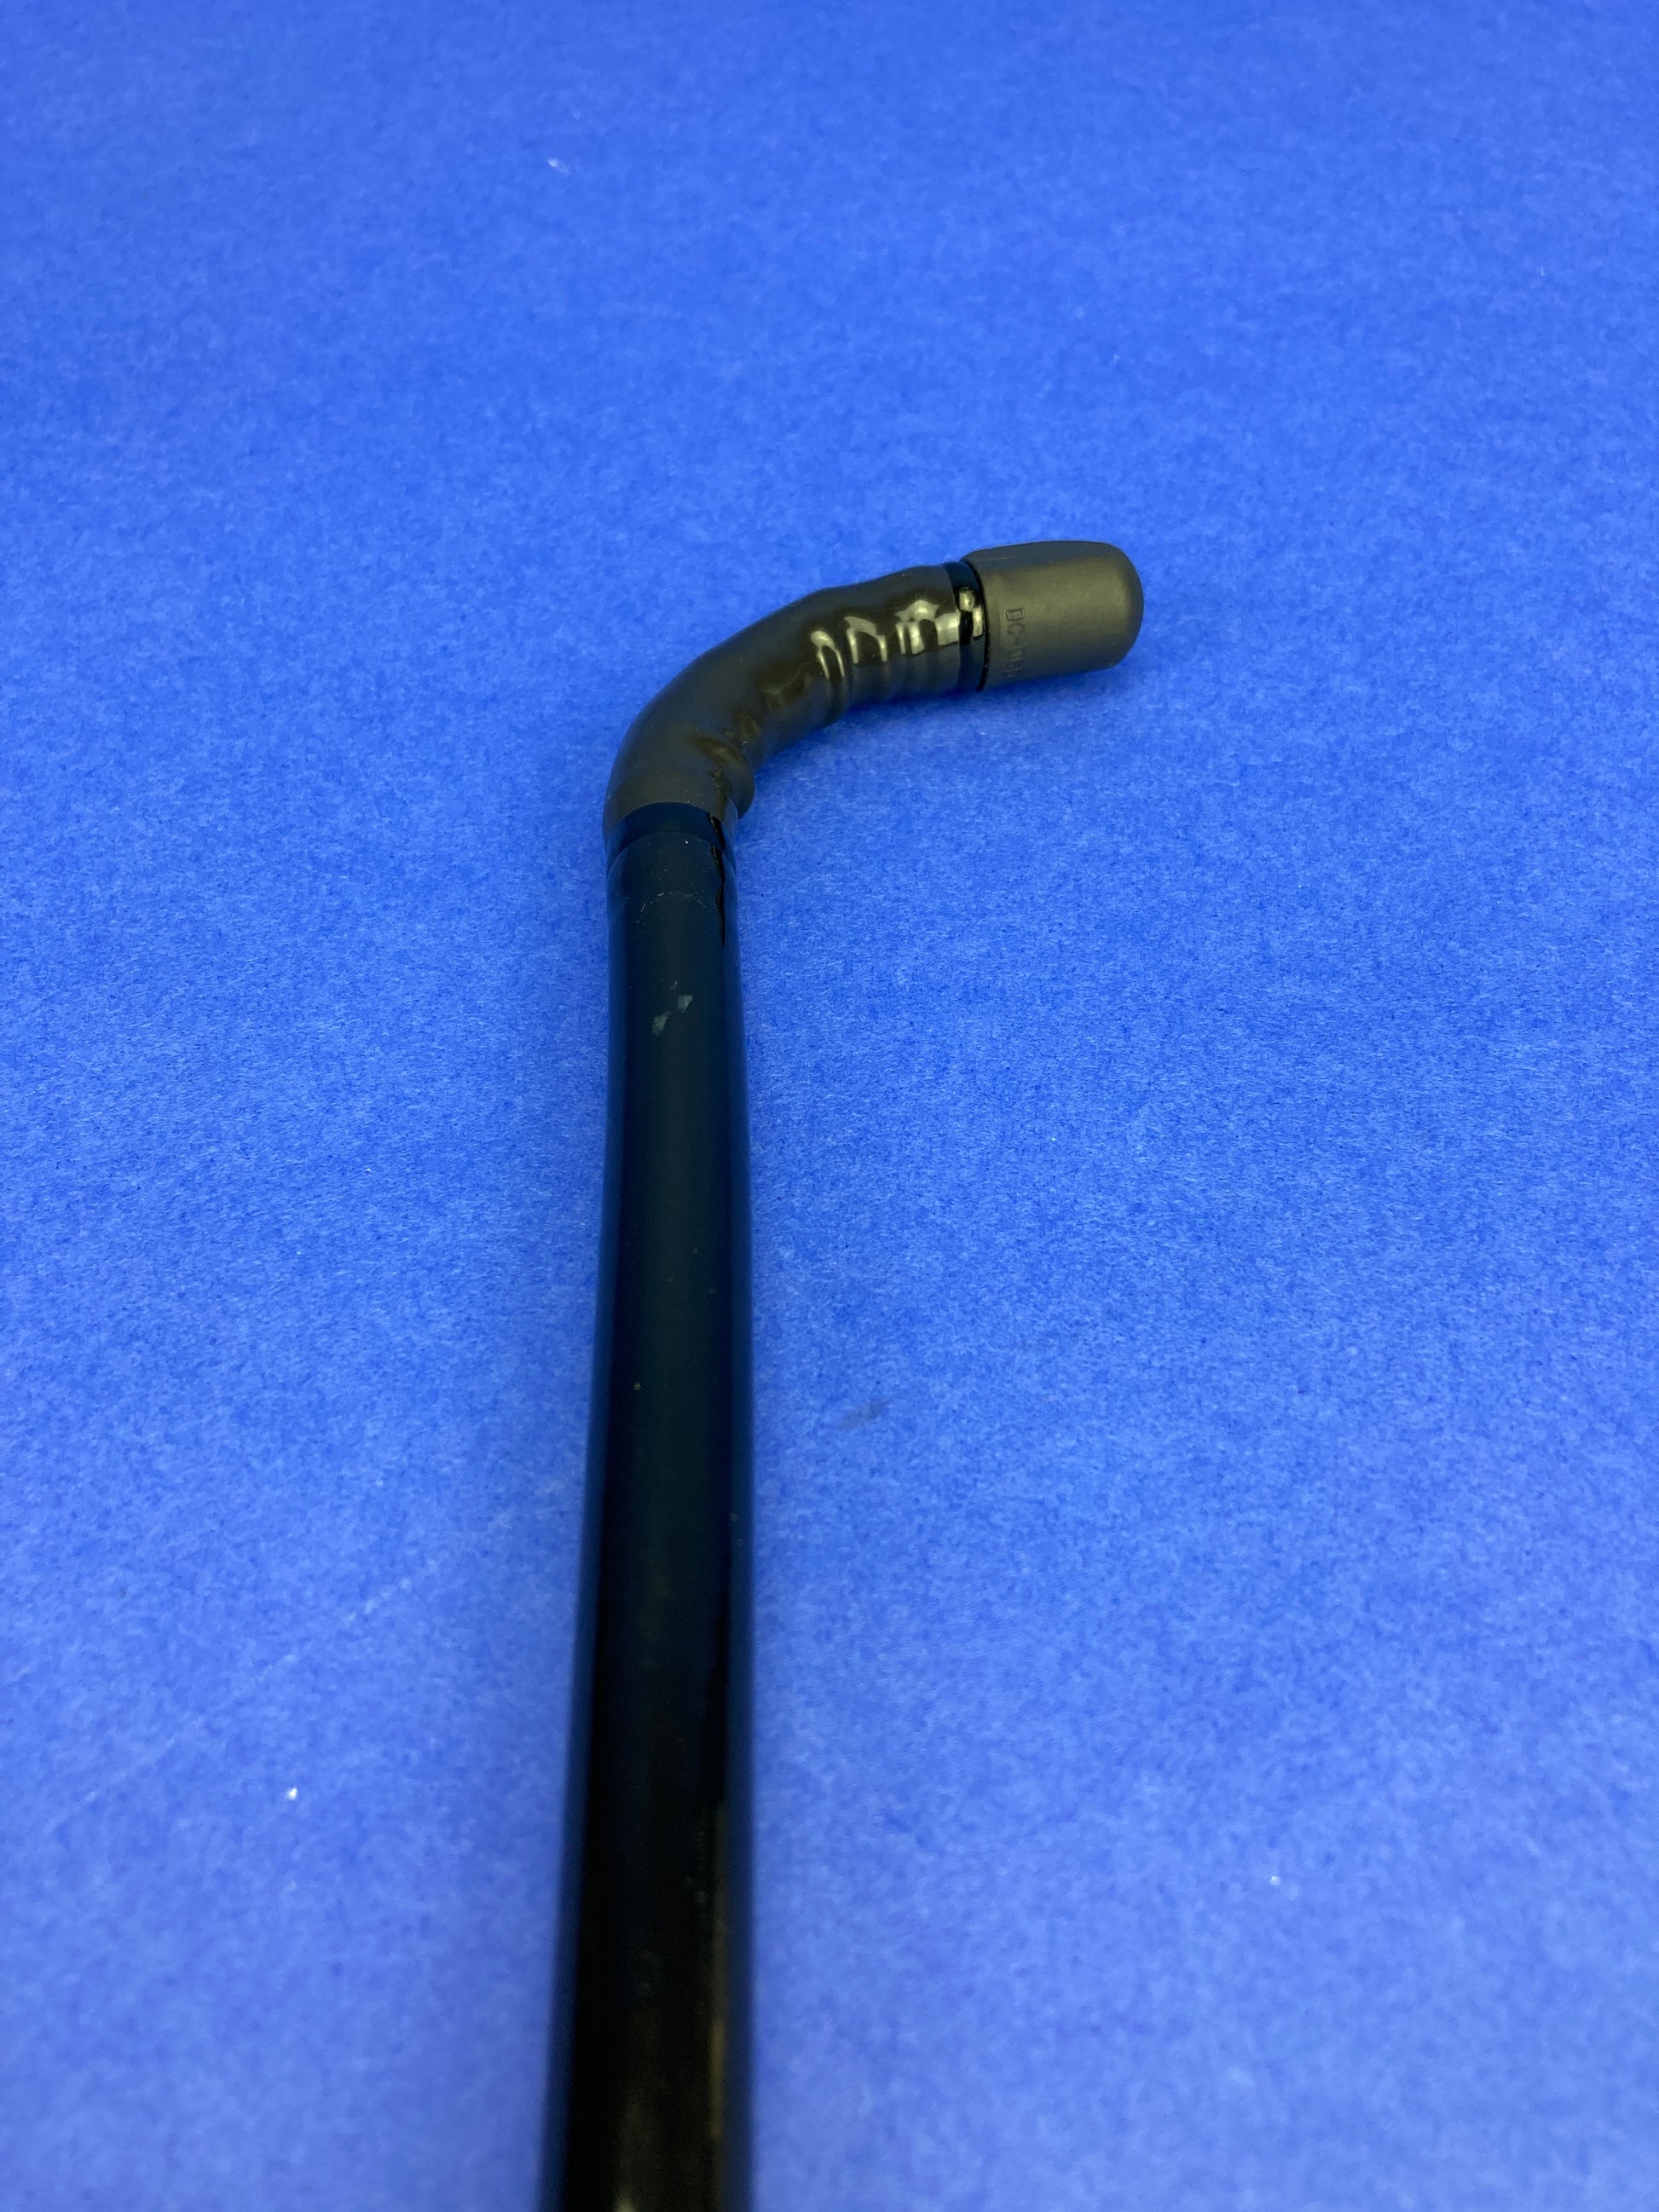 single-use distal end cap permits easier brushing access to the distal end of the endoscope